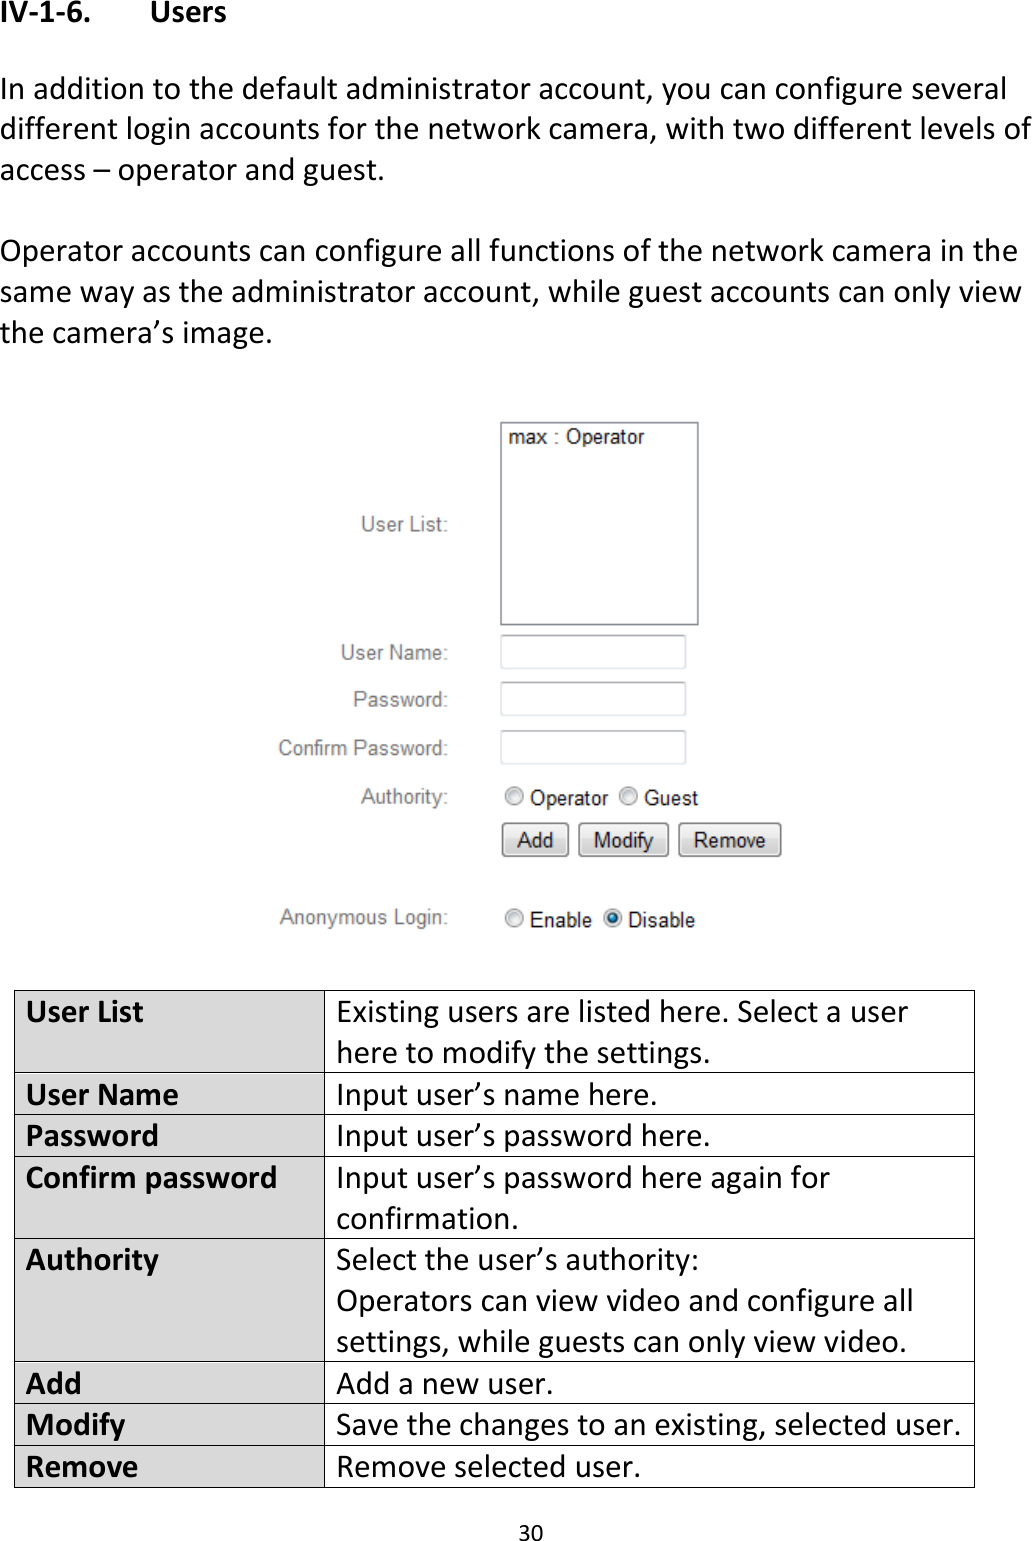 30  IV-1-6.   Users  In addition to the default administrator account, you can configure several different login accounts for the network camera, with two different levels of access – operator and guest.  Operator accounts can configure all functions of the network camera in the same way as the administrator account, while guest accounts can only view the camera’s image.    User List Existing users are listed here. Select a user here to modify the settings. User Name Input user’s name here. Password Input user’s password here. Confirm password  Input user’s password here again for confirmation. Authority Select the user’s authority:  Operators can view video and configure all settings, while guests can only view video. Add Add a new user. Modify Save the changes to an existing, selected user. Remove  Remove selected user. 